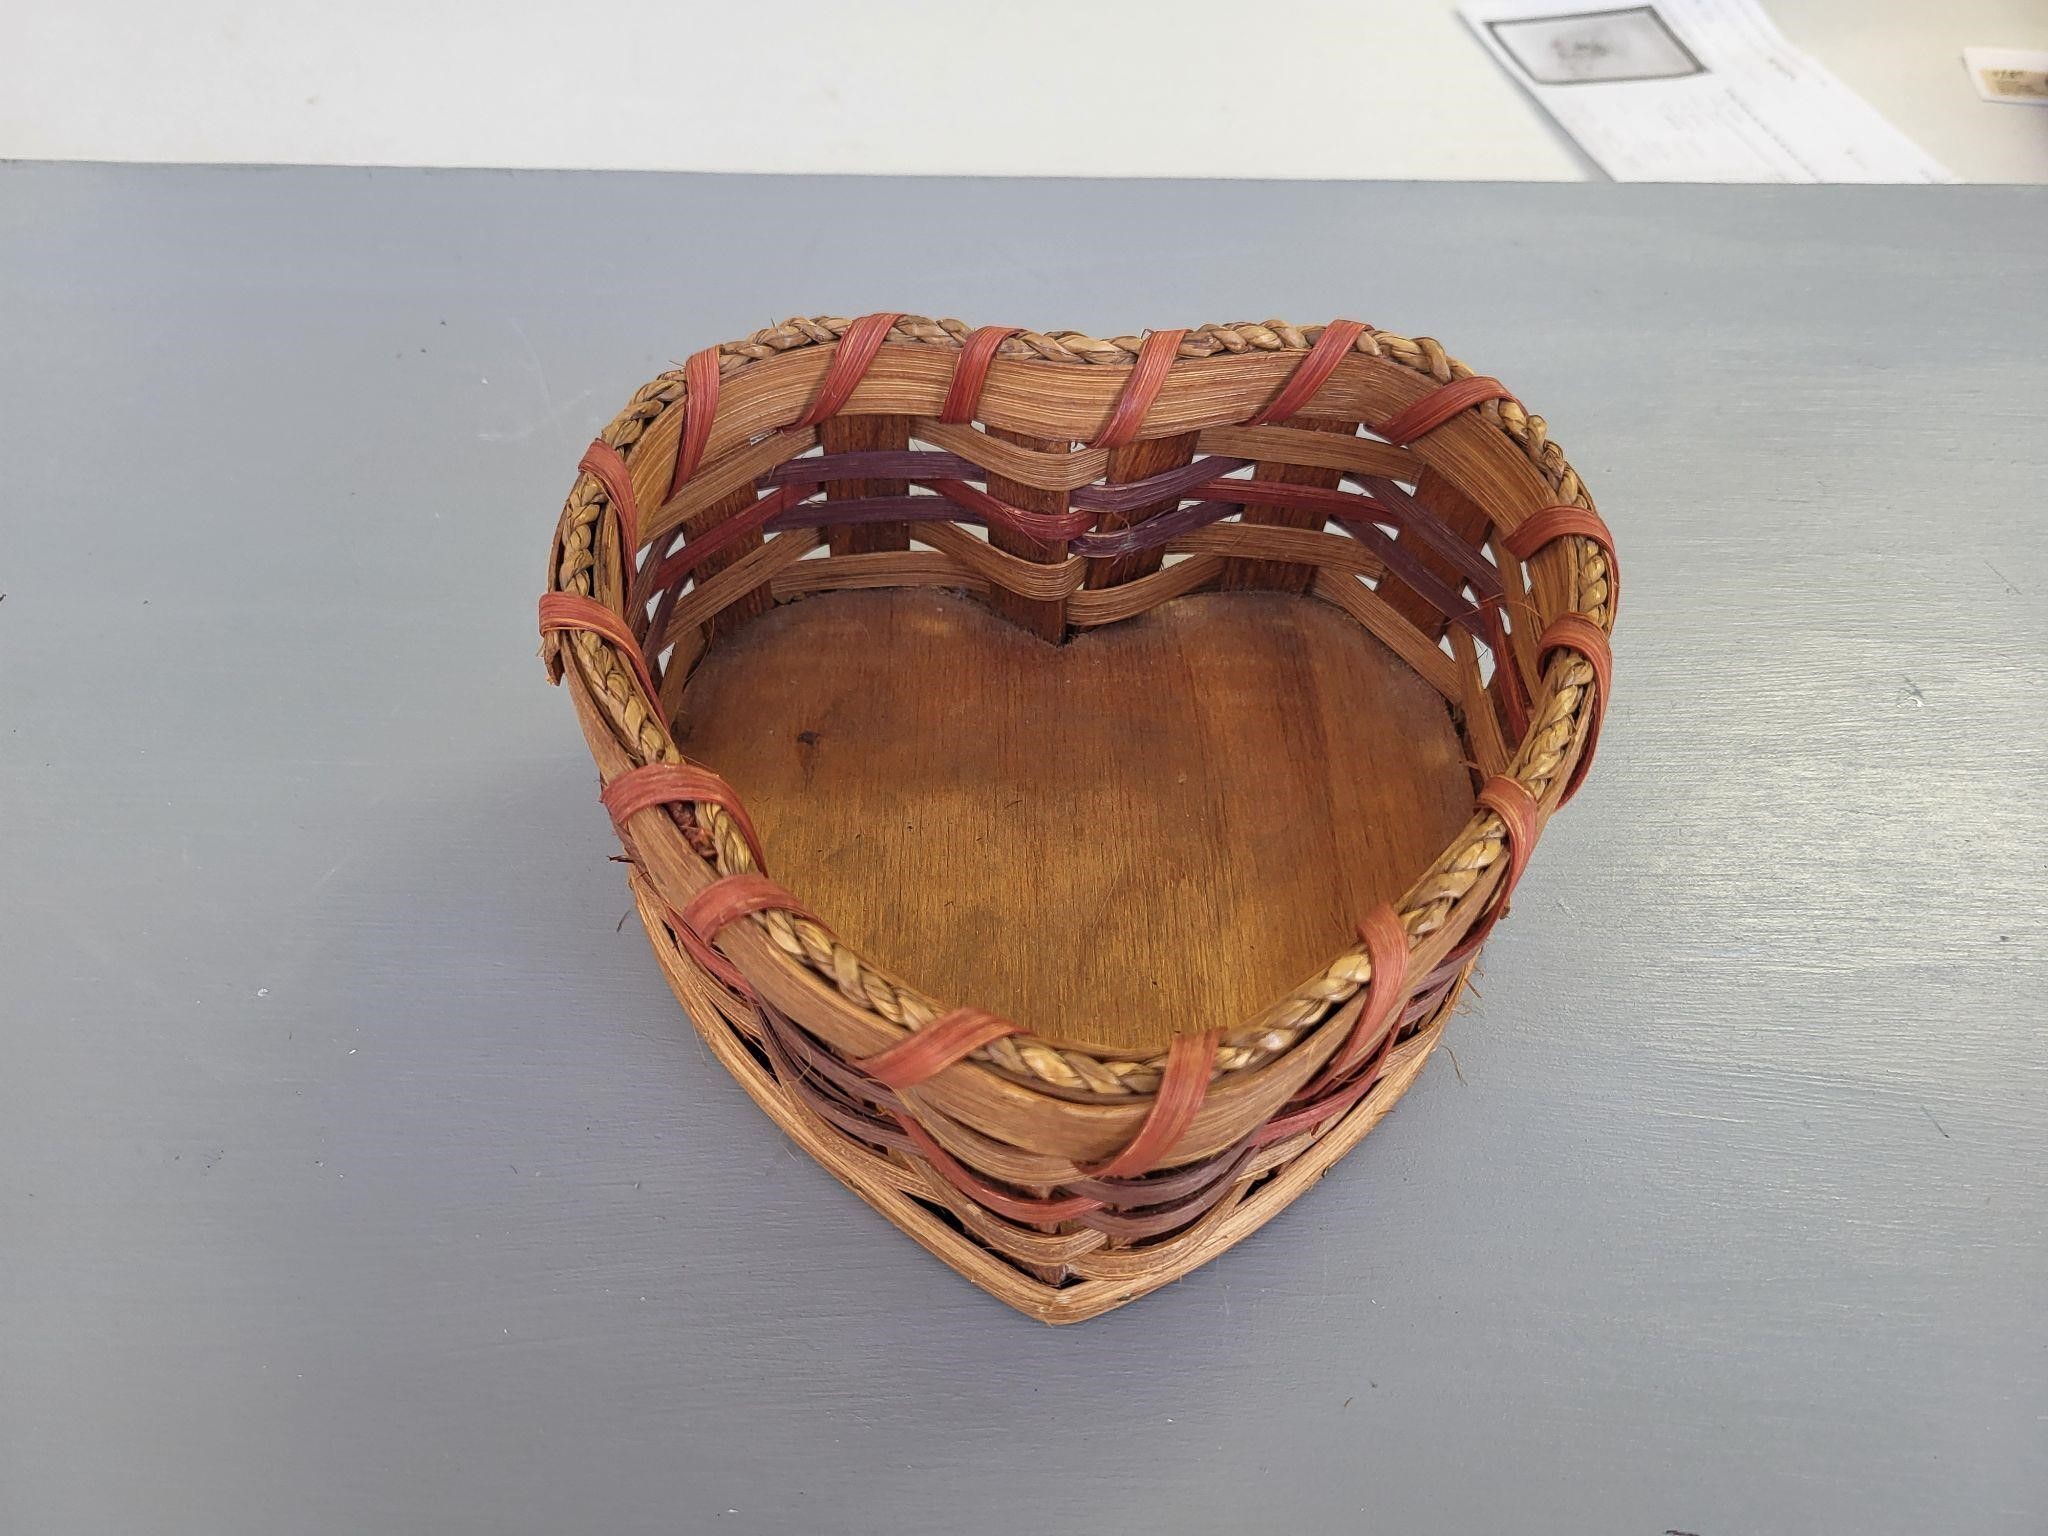 Amish Hand Woven Heart Shaped Basket Resale $60